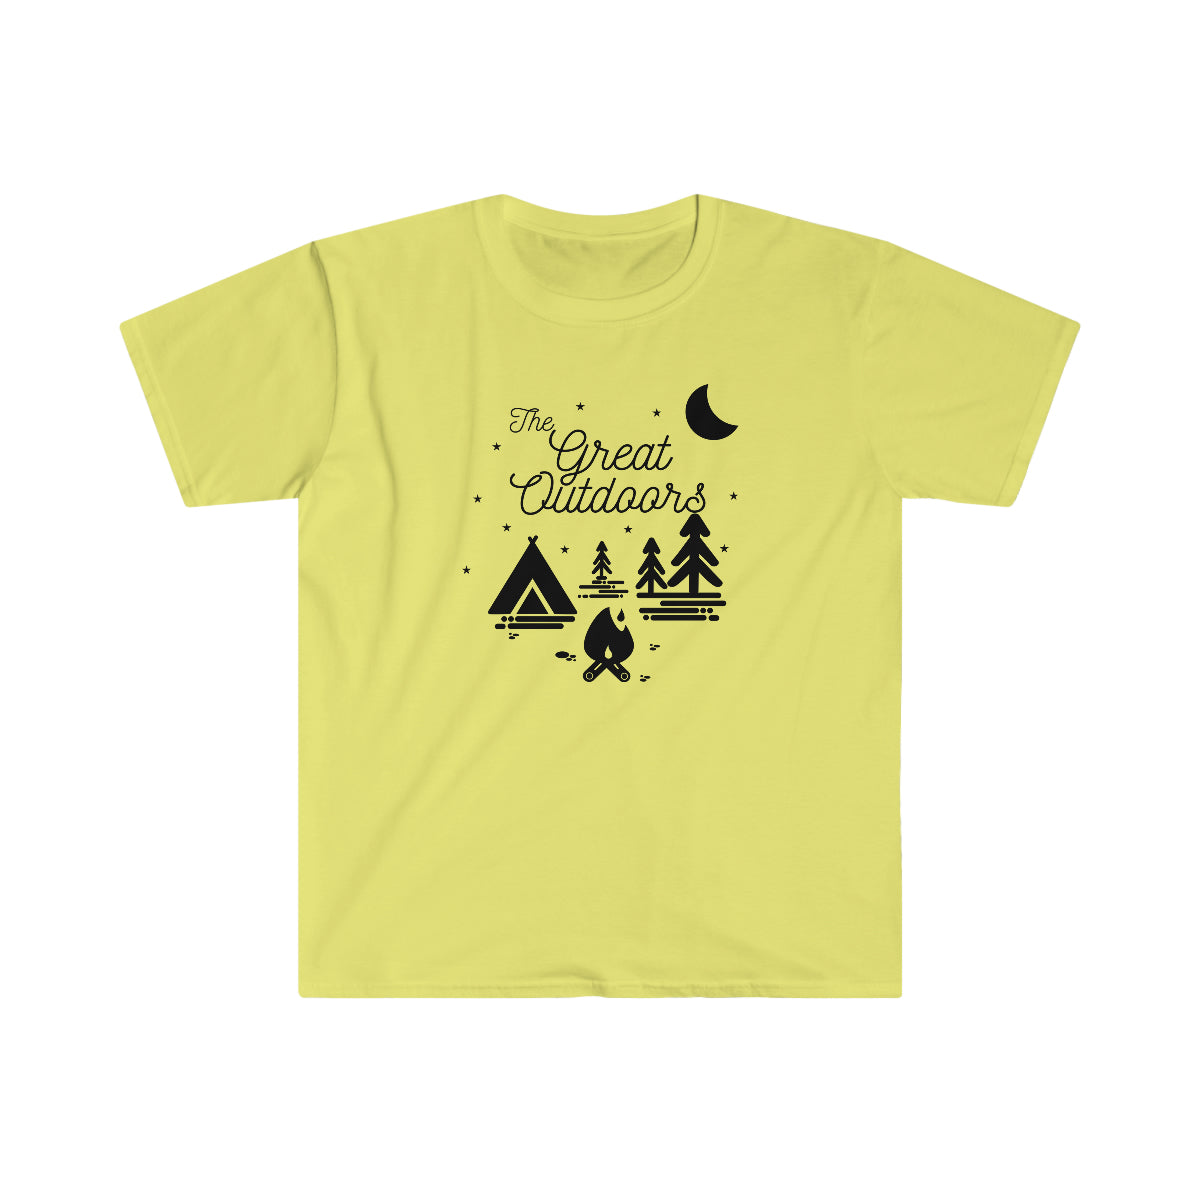 The Great Outdoors - Unisex Softstyle T-Shirt (Gildan 64000)